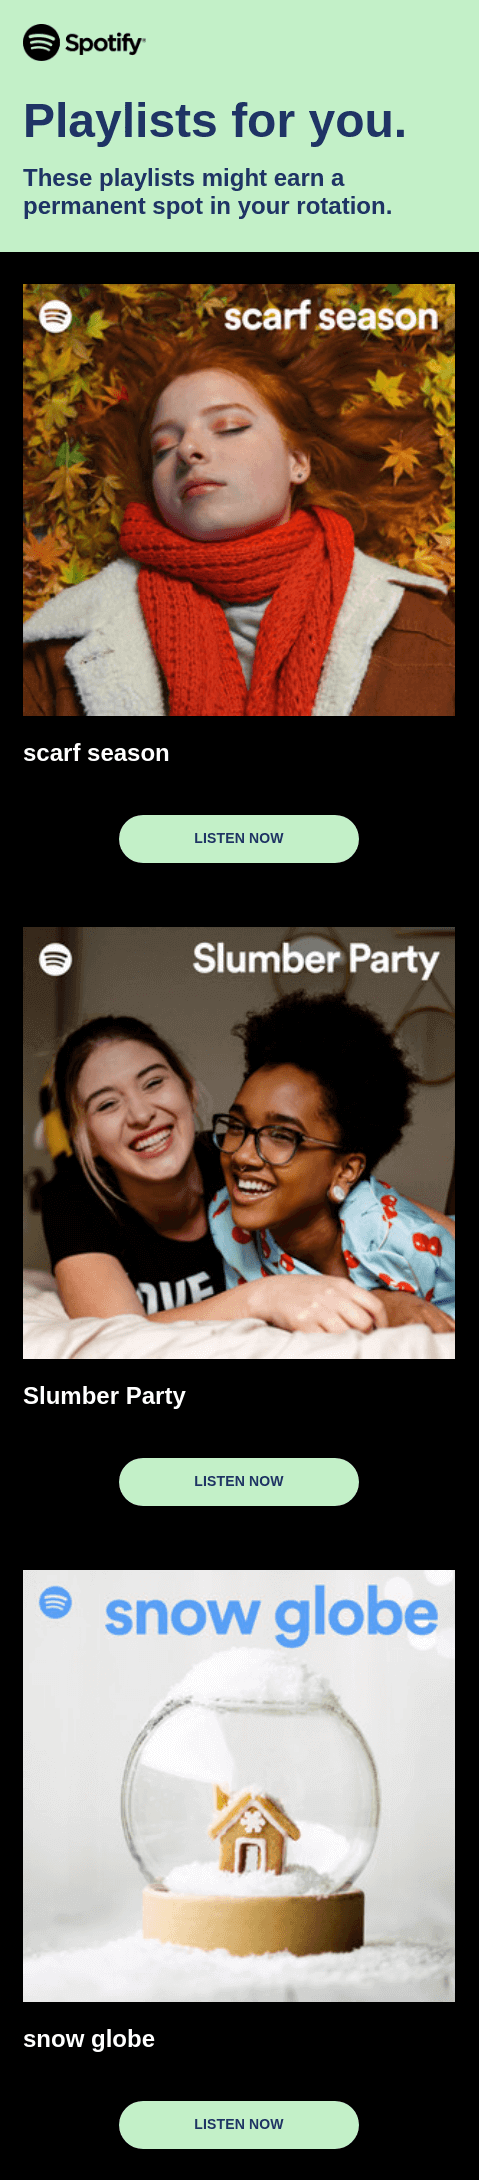 A personalized message from Spotify with a personalized selection of playlists and a tagline that reads “Playlists for you.”